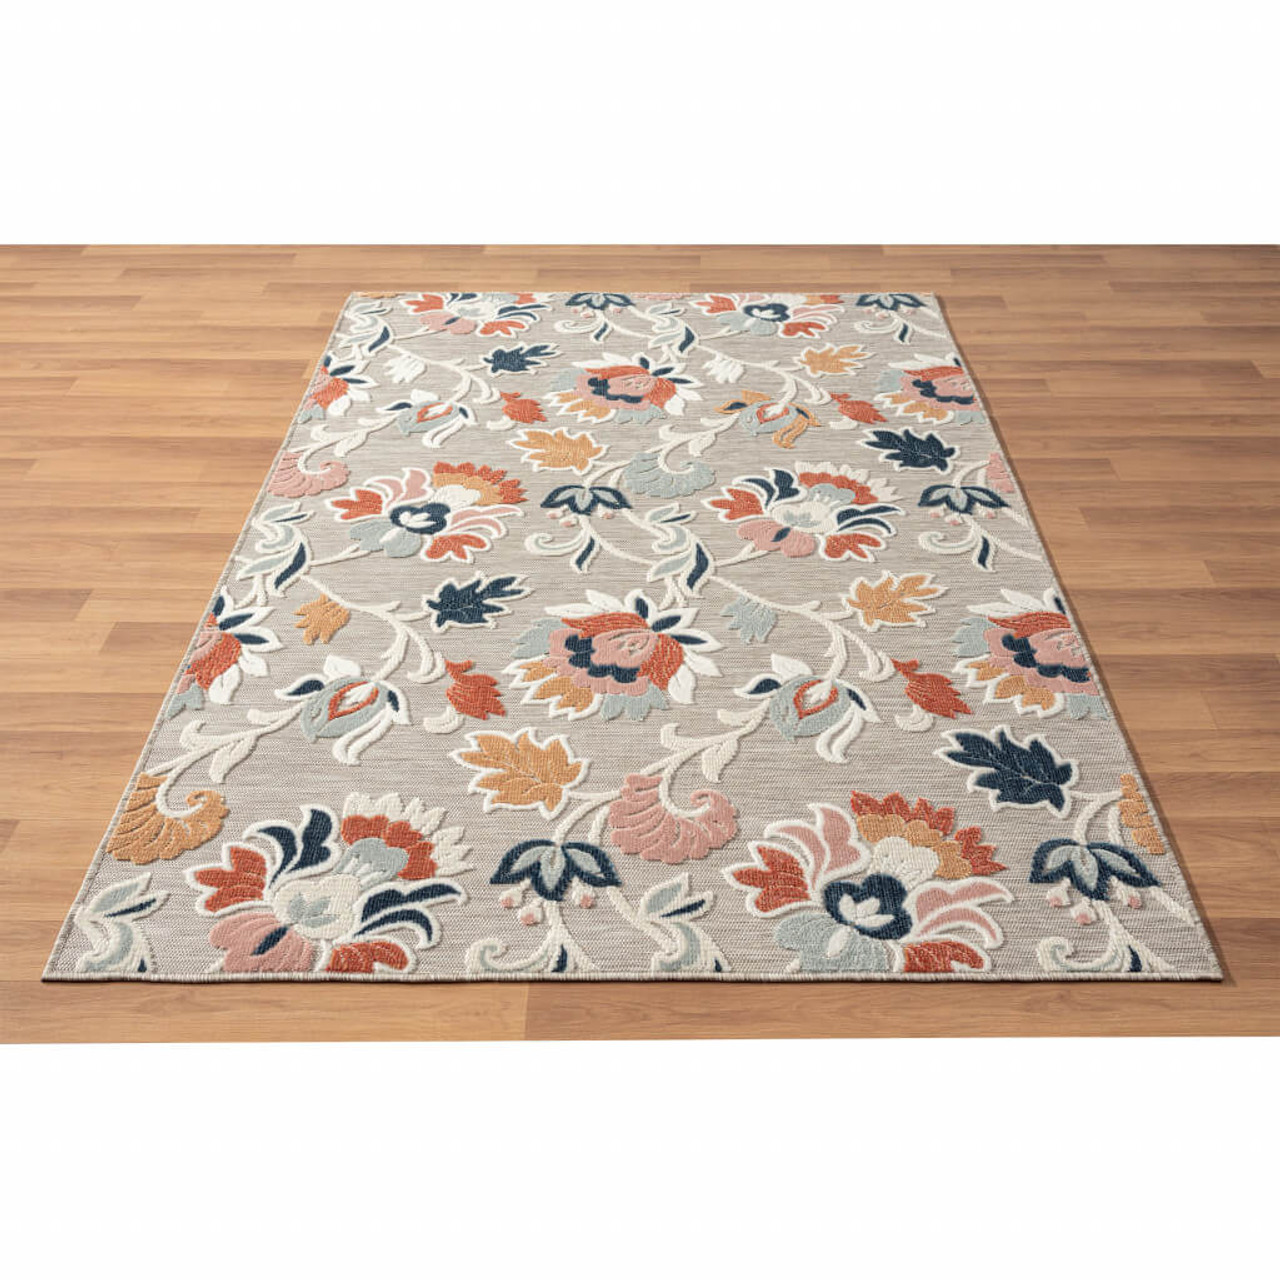 8' X 10' Blue And Gray Floral Stain Resistant Indoor Outdoor Area Rug